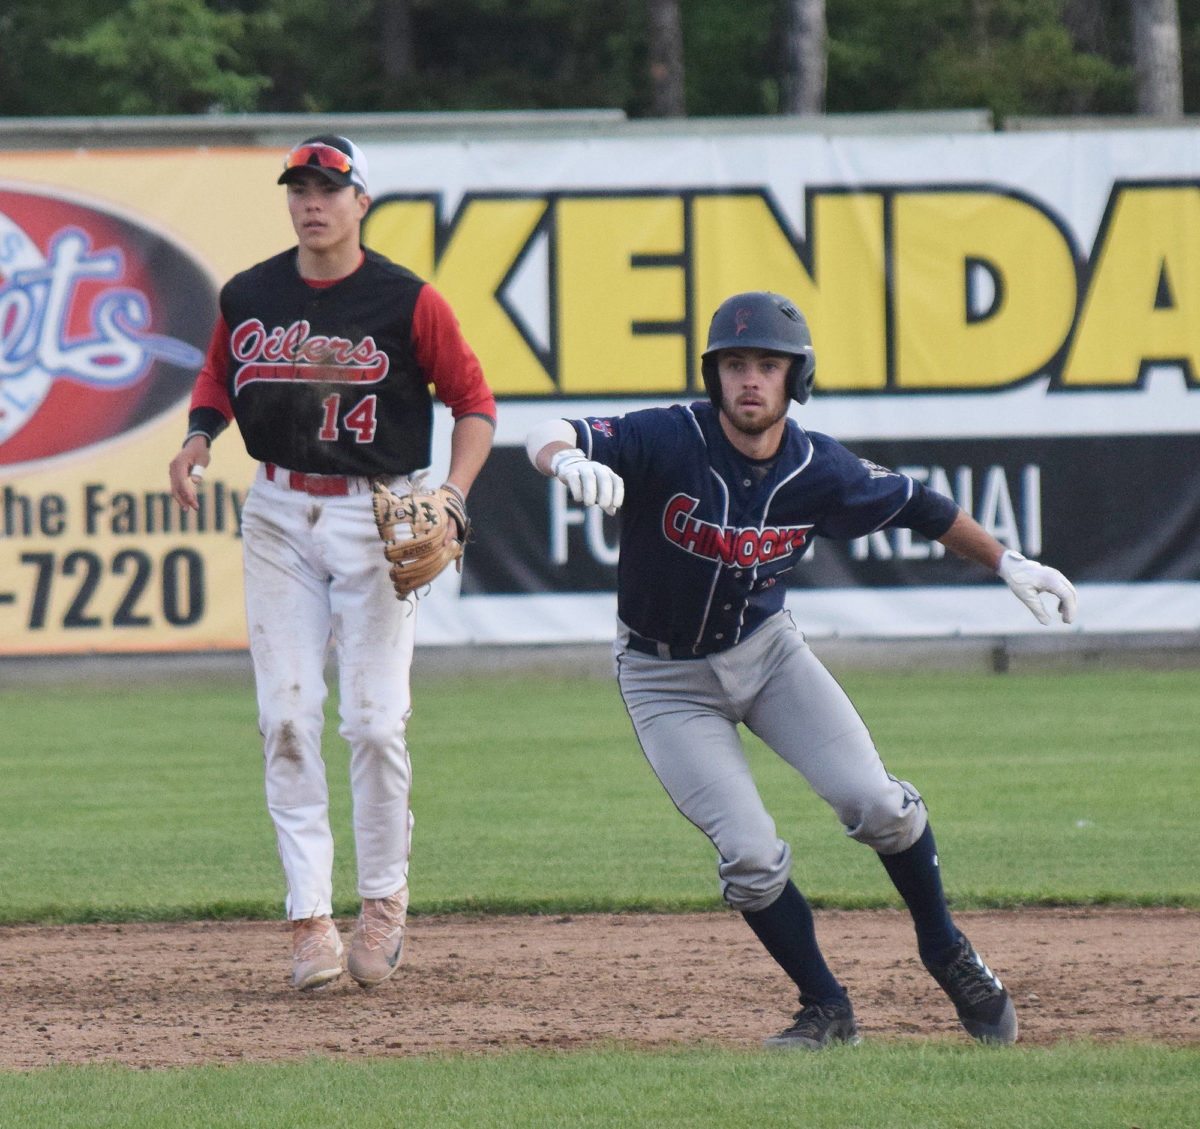 Chugiak/Eagle River Chinooks baserunner Luke VanDover tries to time a move with Peninsula Oilers shortstop Bryan Woo watching closely Friday night at Coral Seymour Memorial Park in Kenai. (Photo by Joey Klecka/Peninsula Clarion)